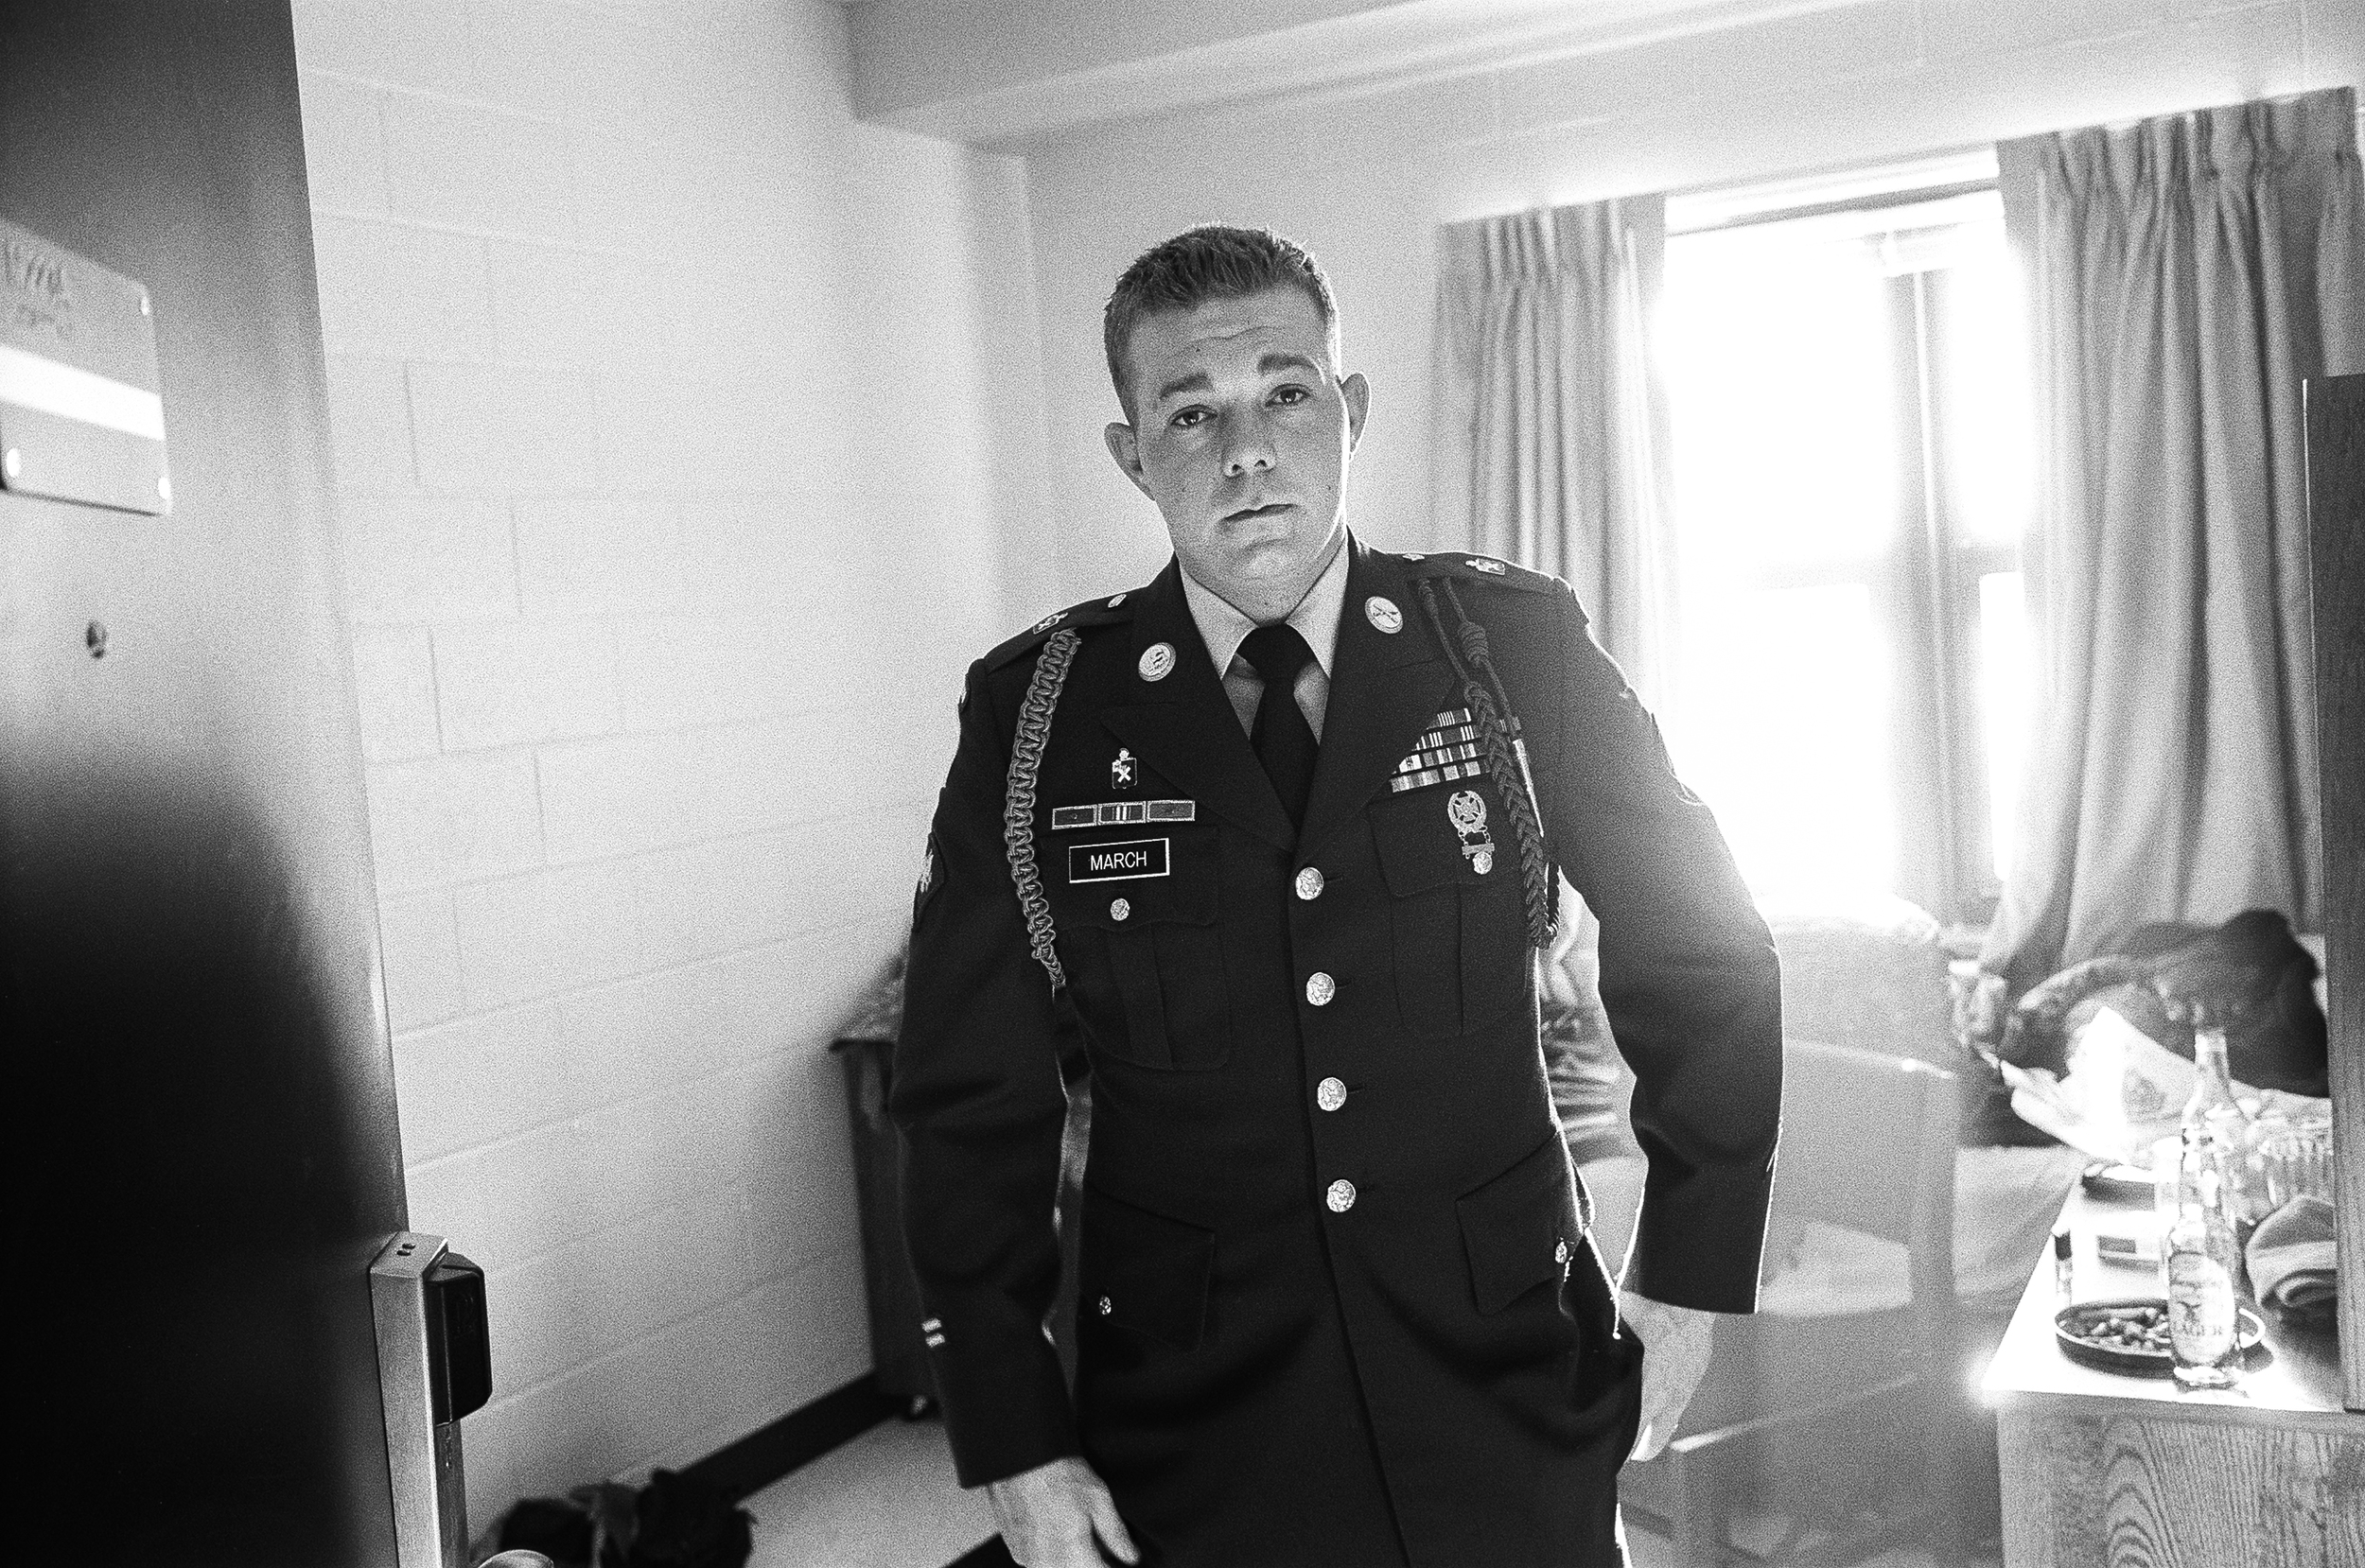  SPC James March wears his Class A uniform before going home on leave, January, 2010.&nbsp;After serving in Afghanistan March suffered from depression and in February 2015, at age 31,&nbsp;he took his own life in Painesville, Ohio. March loved animal